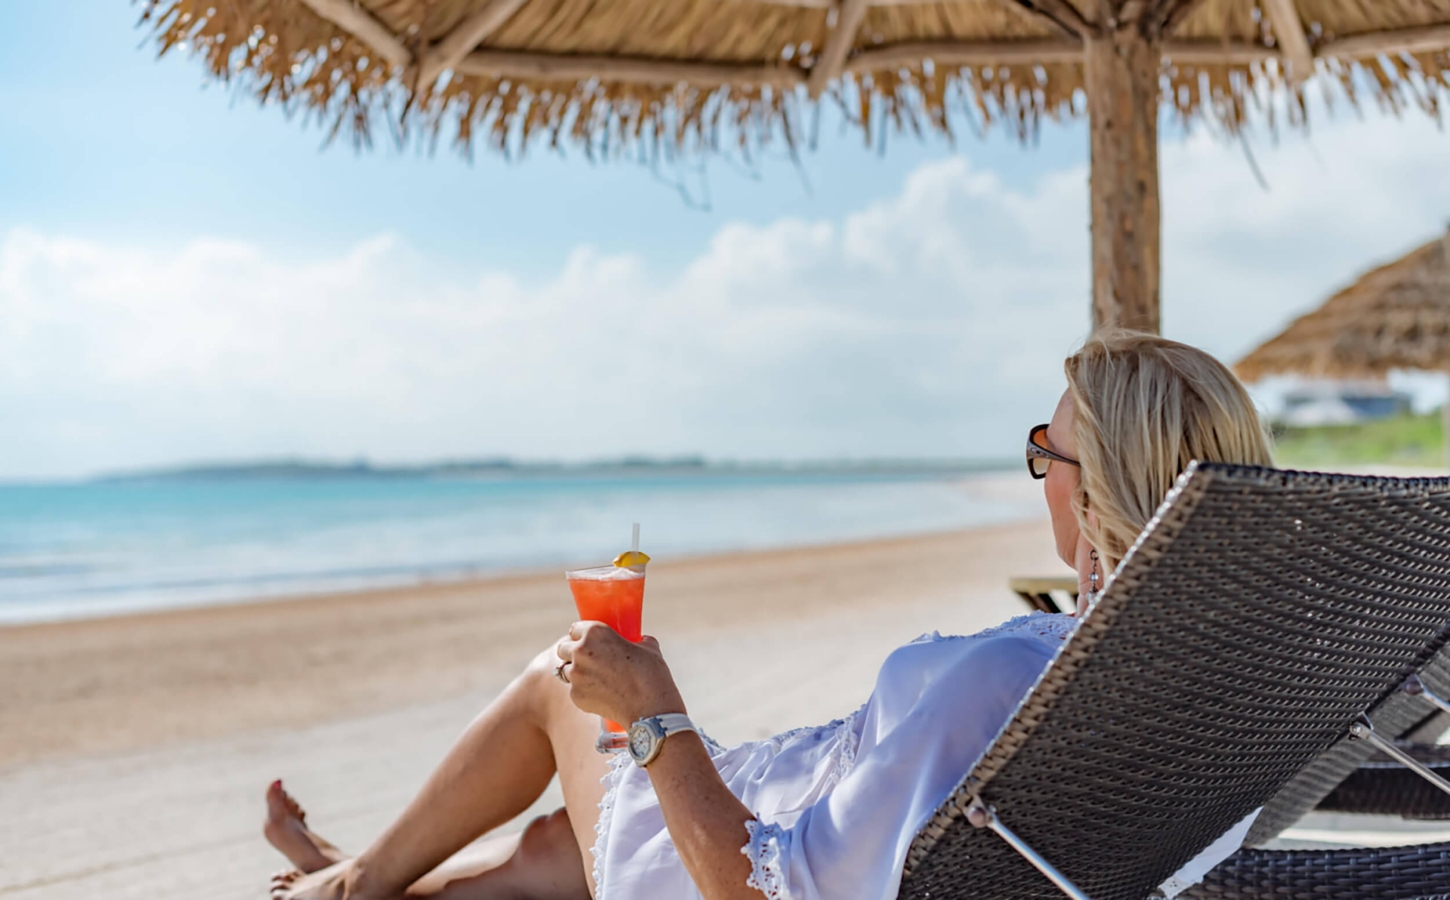 Relaxed club lifestyle at The Abaco Club with a woman enjoying a cocktail on the beach, surrounded by the beauty of The Bahamas.